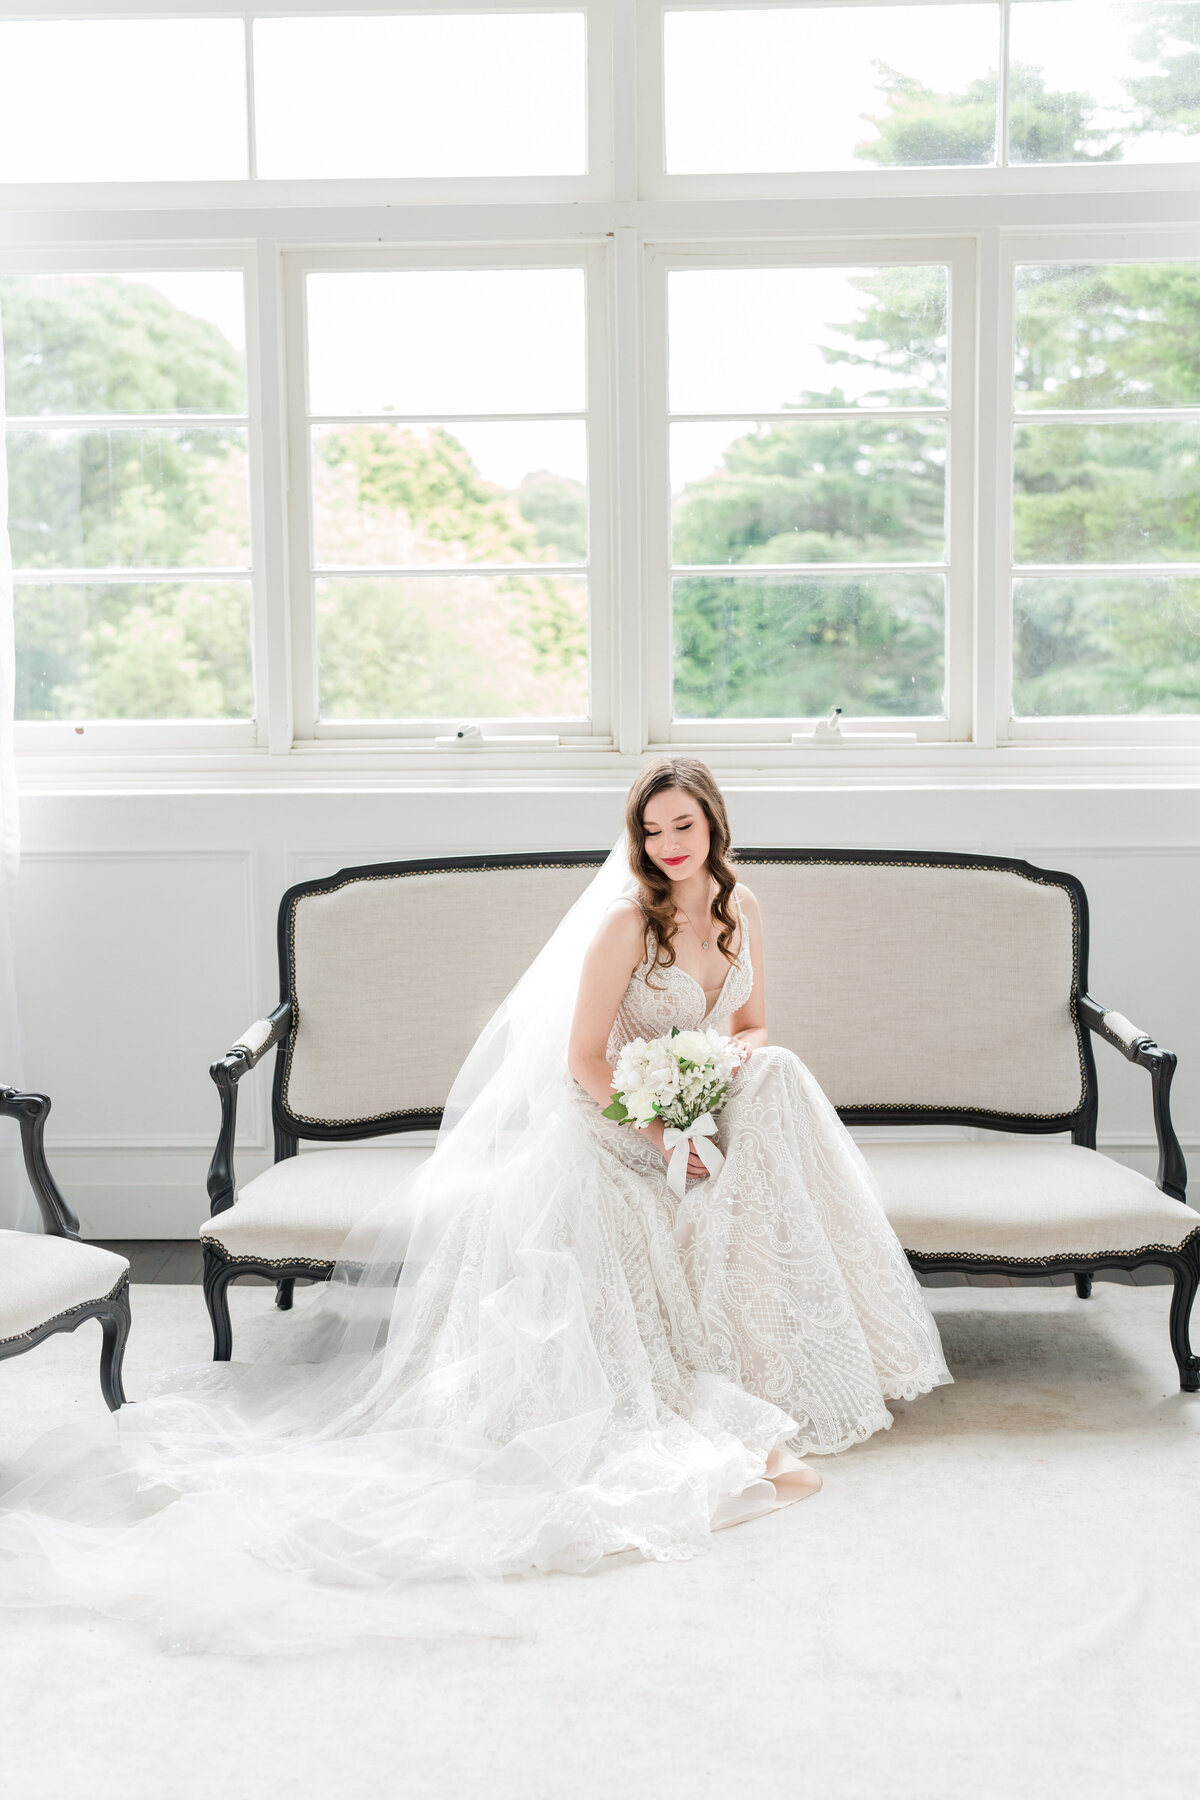 Romantic wedding details at The Robertson Hotel